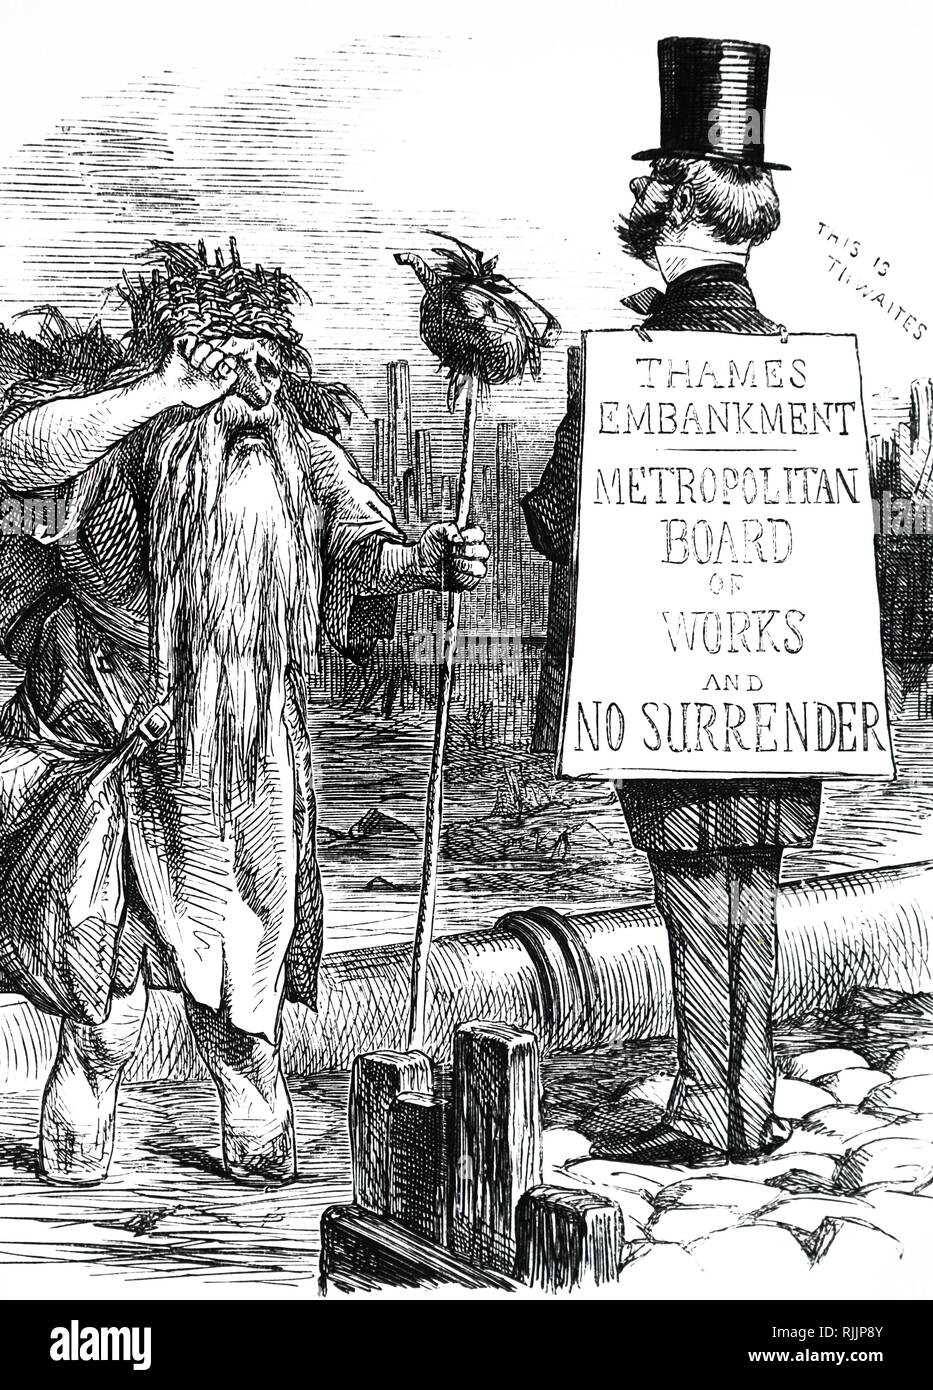 A cartoon depicting John Thwaites, Chairman of the Metropolitan Board of Works, face to face with Father Thames. In 1861 the Board received nearly a million pounds and spent £900,000 on the Thames Embankment and the Metropolitan Main Drainage Scheme amid at clearing up the Thames and providing London with proper sewage disposal. John Thwaites (1815-1870) a British politician and first Chairman of the Metropolitan Board of Works. Dated 19th century Stock Photo